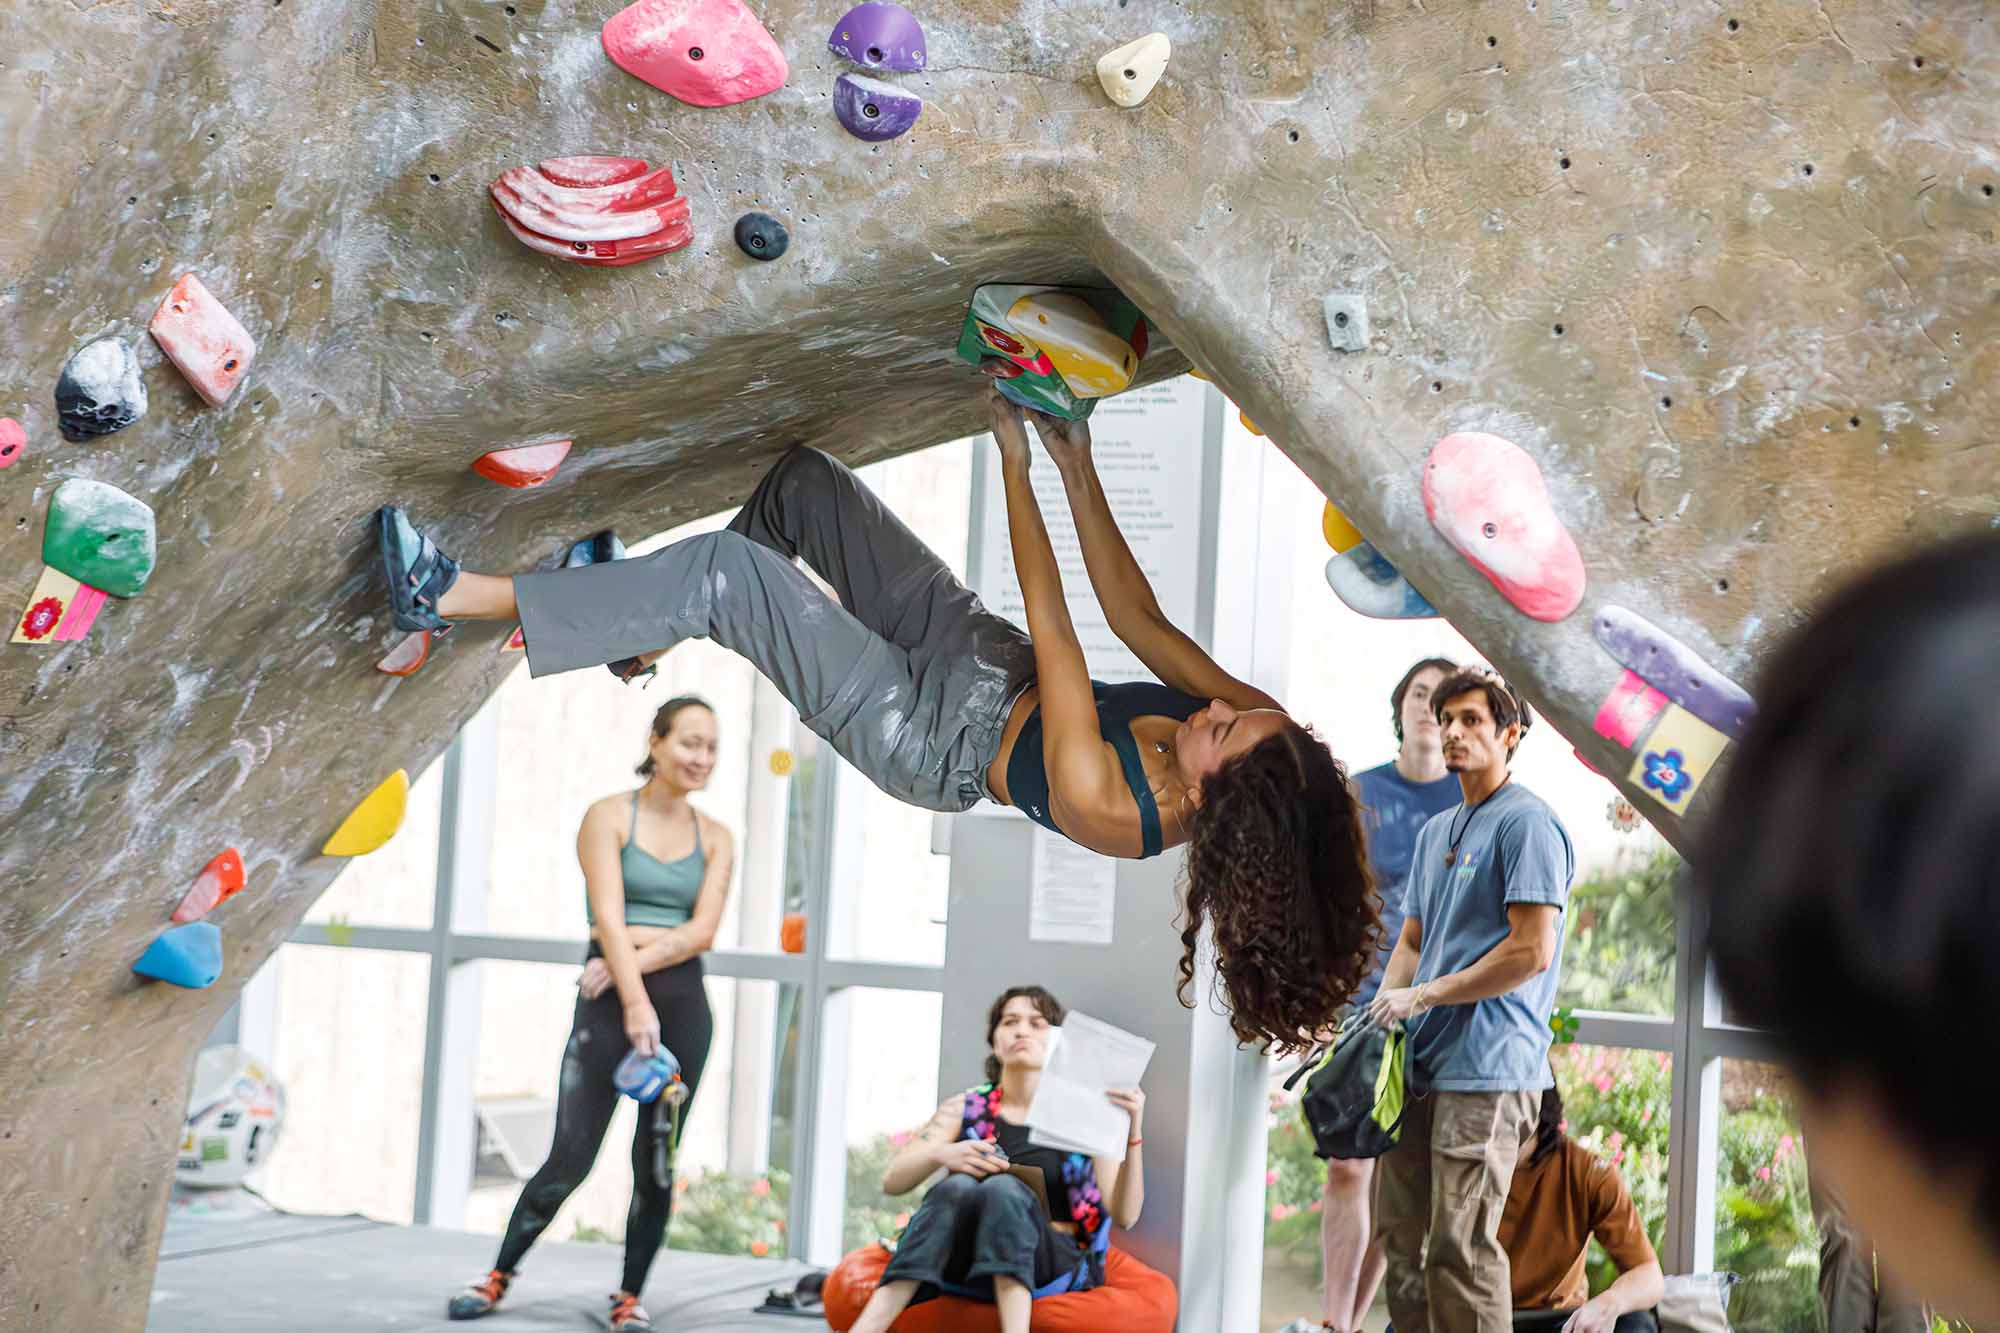 student is bouldering upside down on an indoor climbing wall